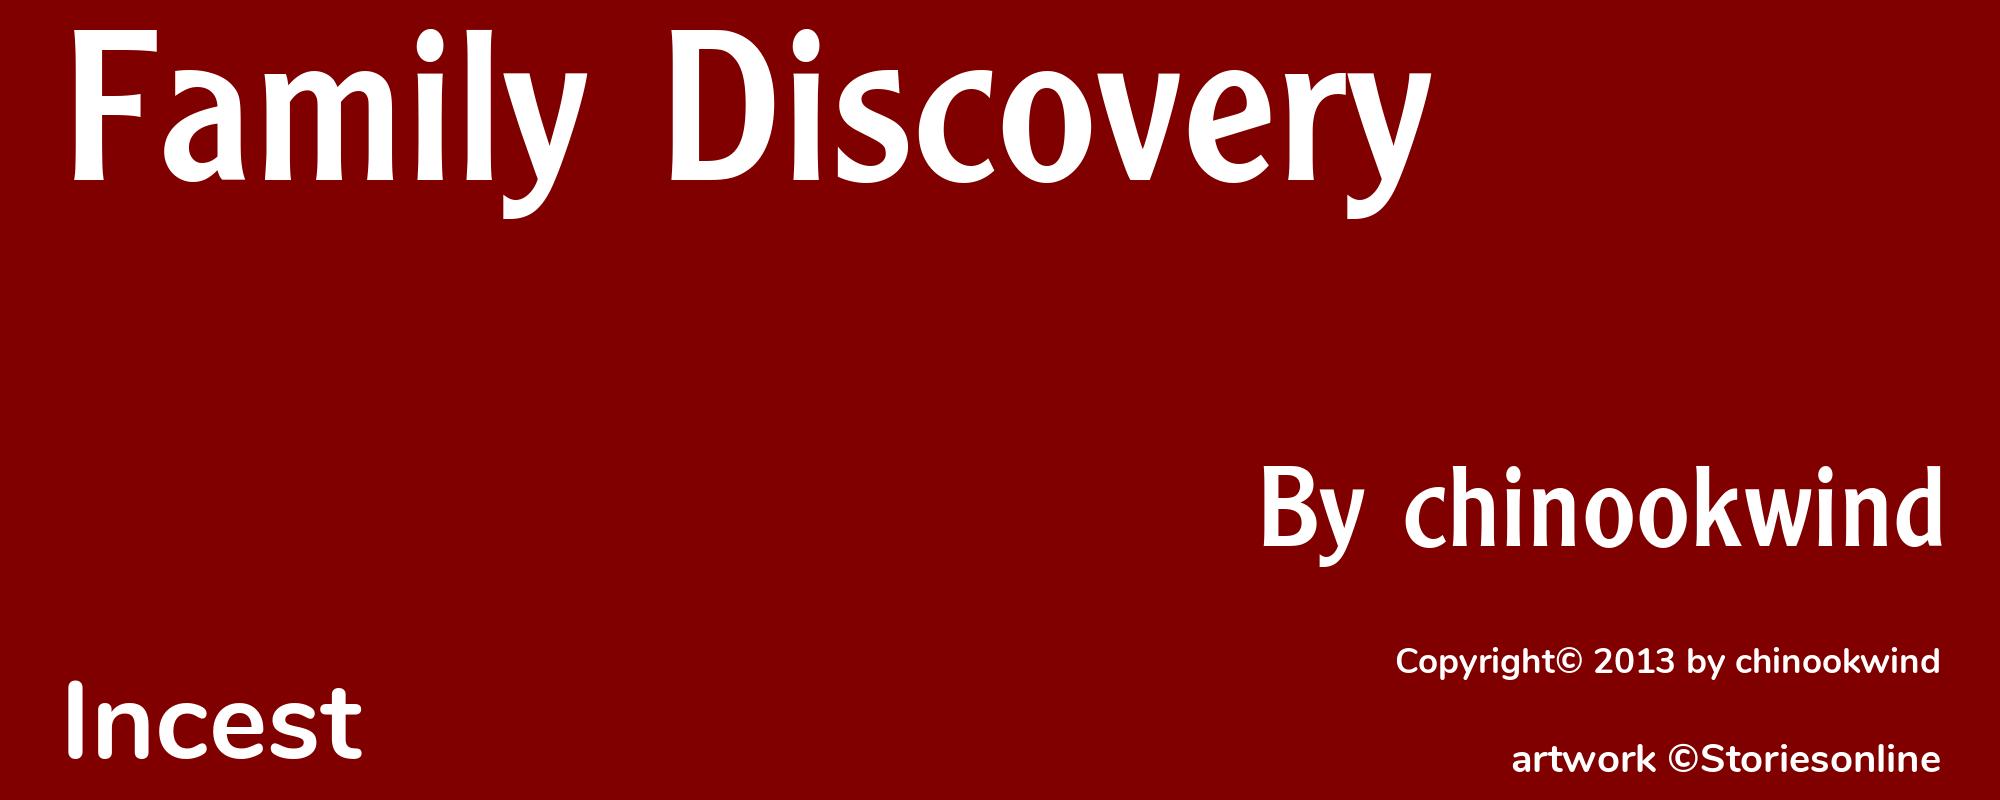 Family Discovery - Cover